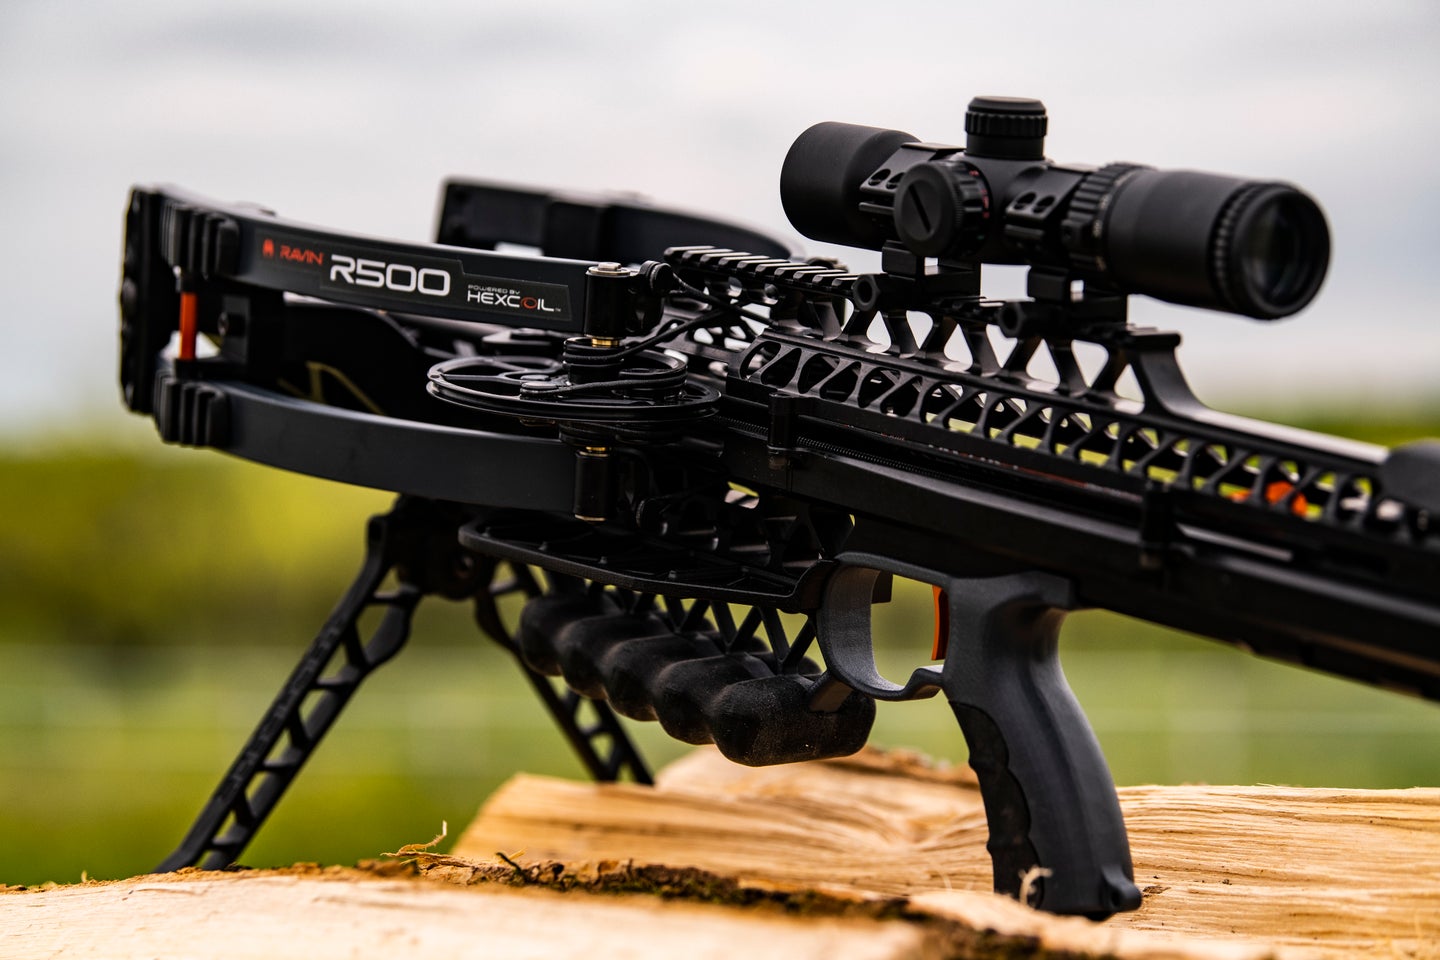 The Ravin R500 is the fastest crossbow ever